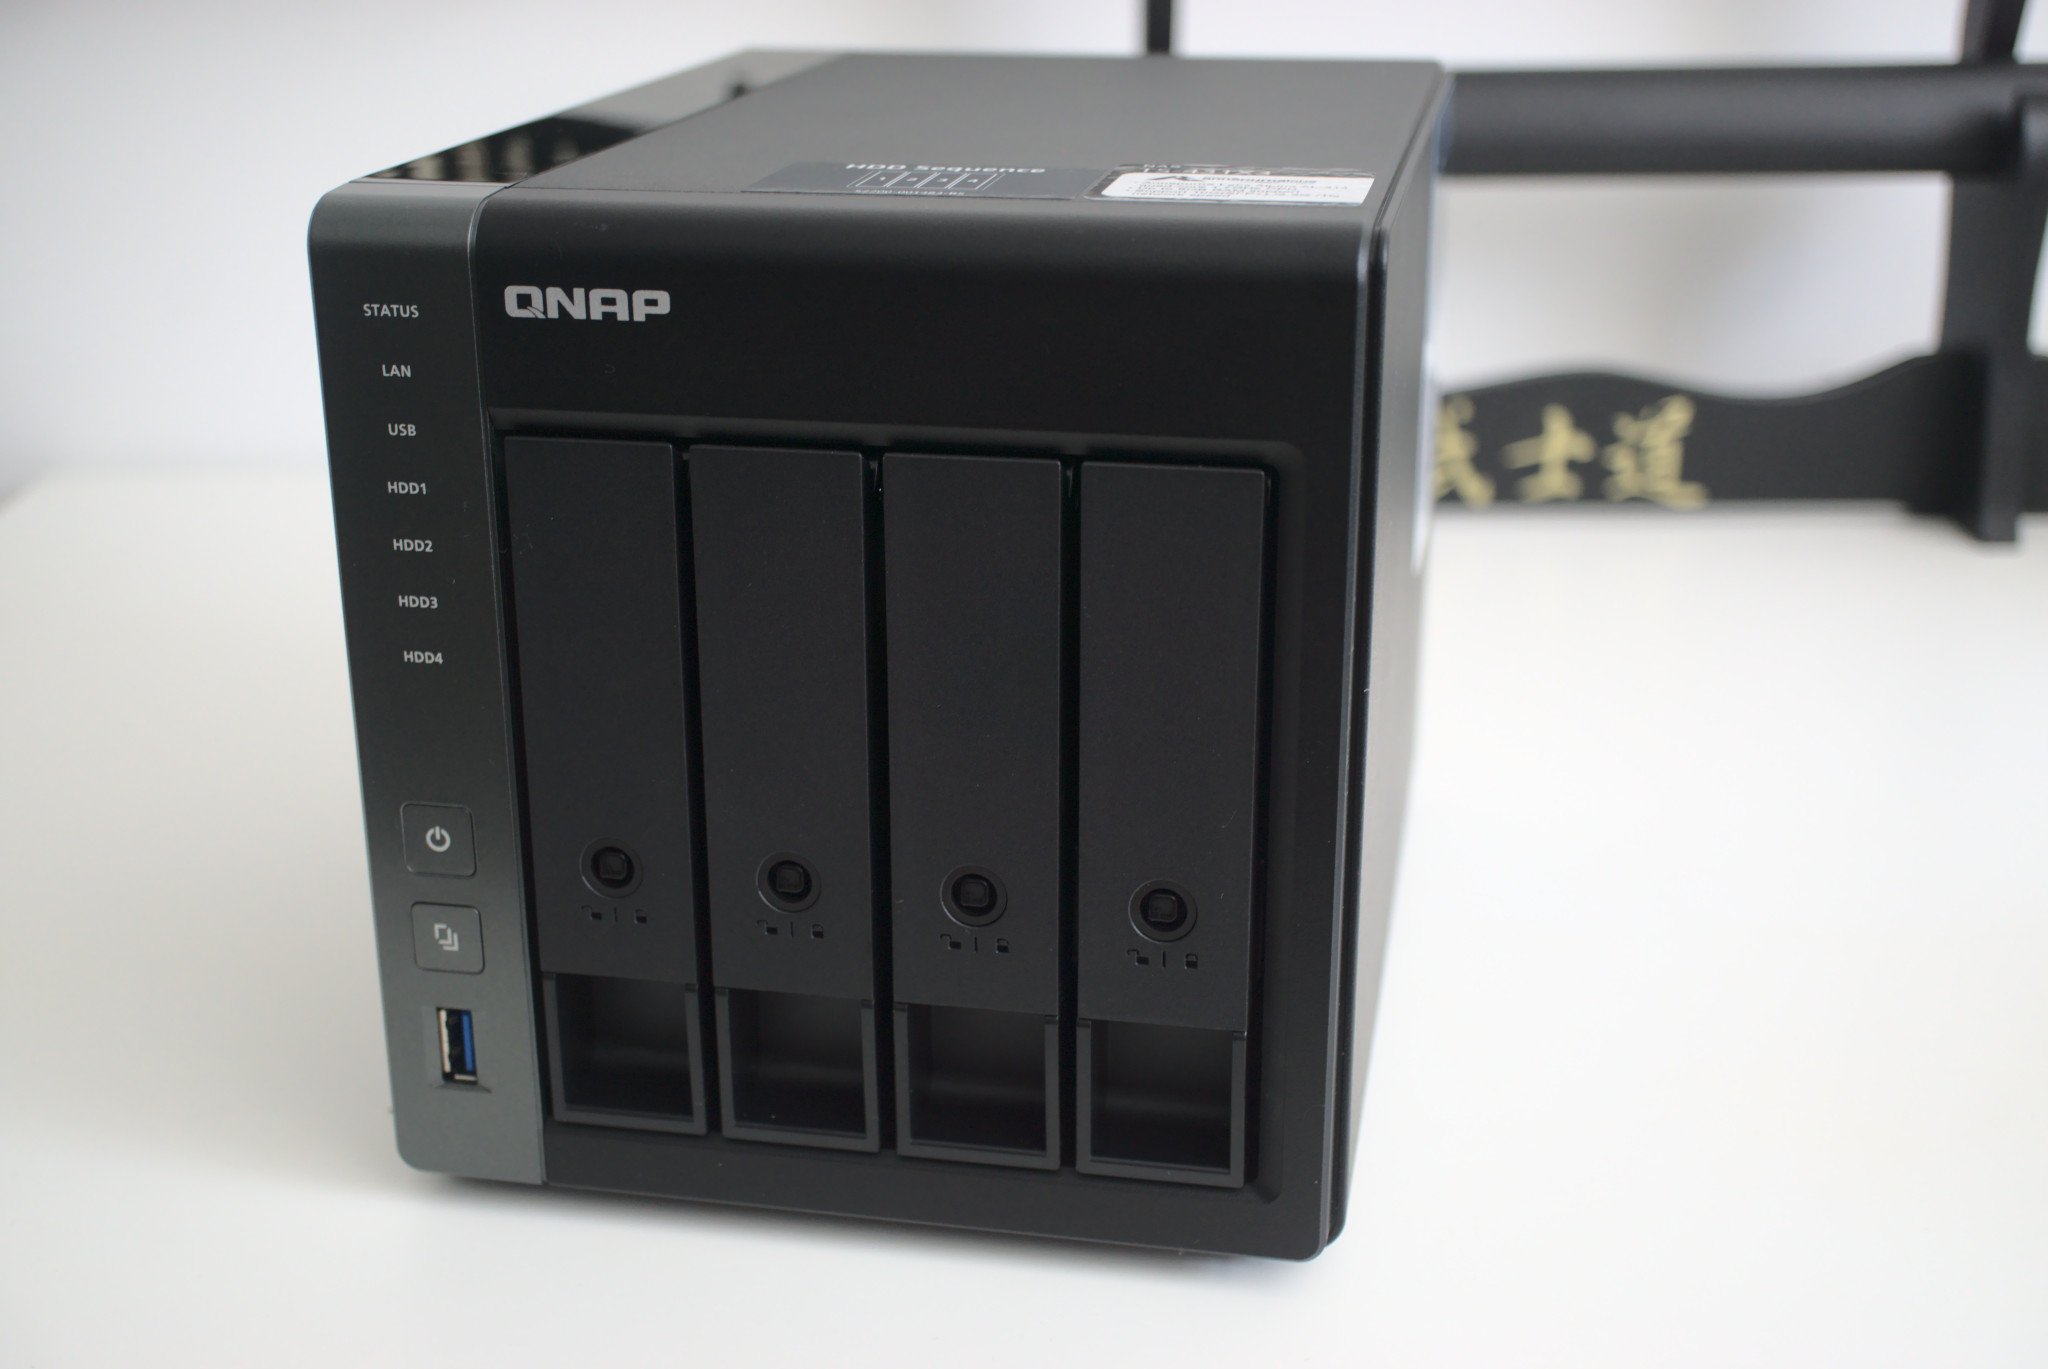 TS-431X3 review: A capable super-fast 10Gb networking | Windows